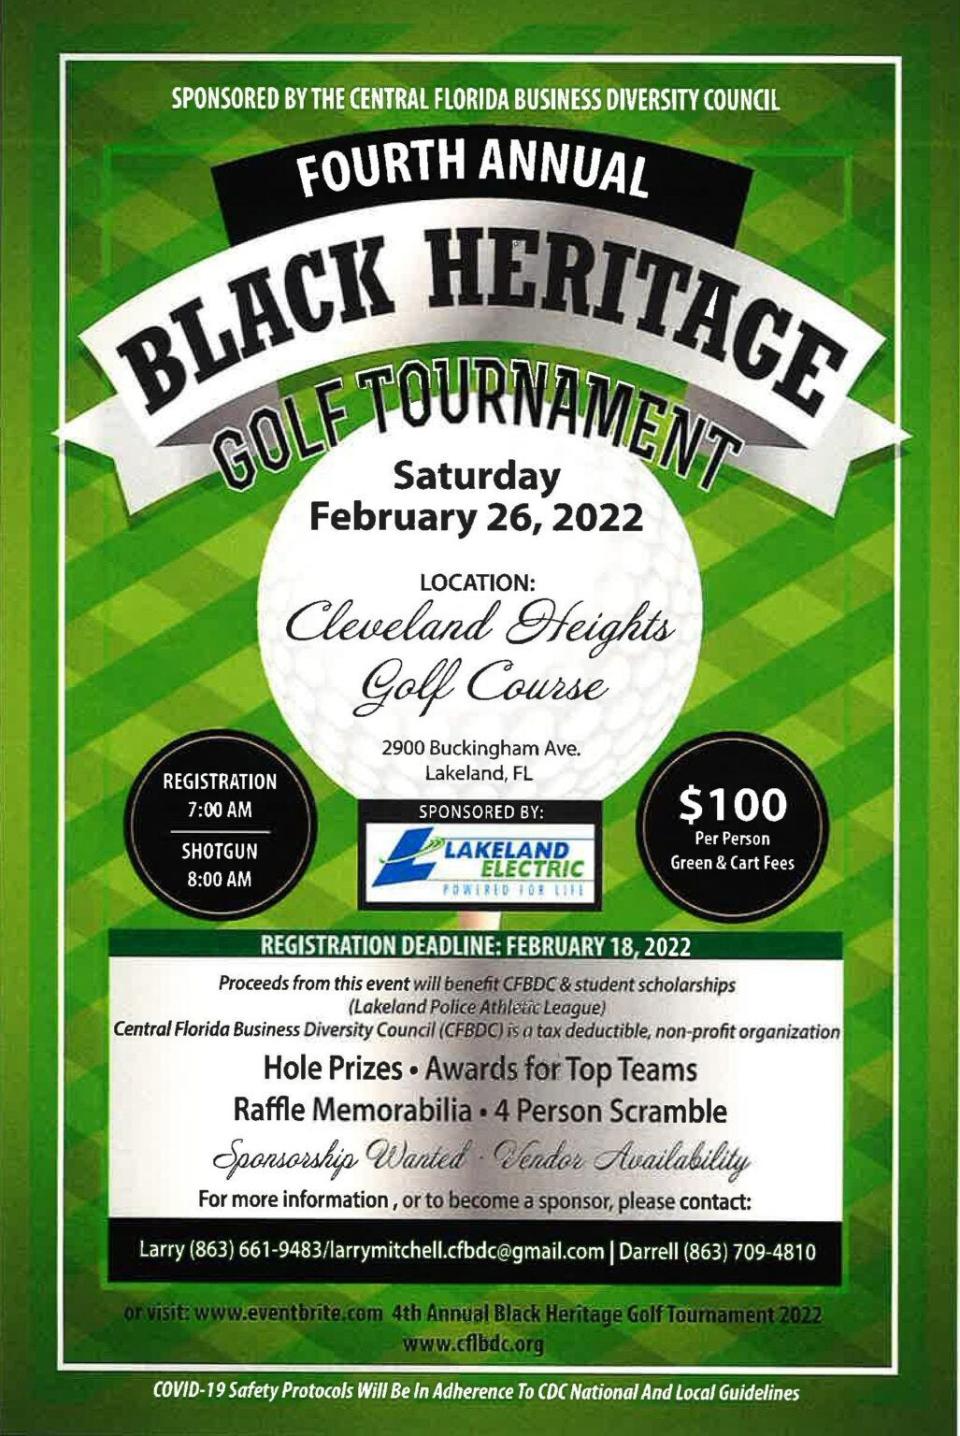 The Central Florida Business Diversity Council is hosting their 4th annual Black Heritage Golf Tournament on Saturday.